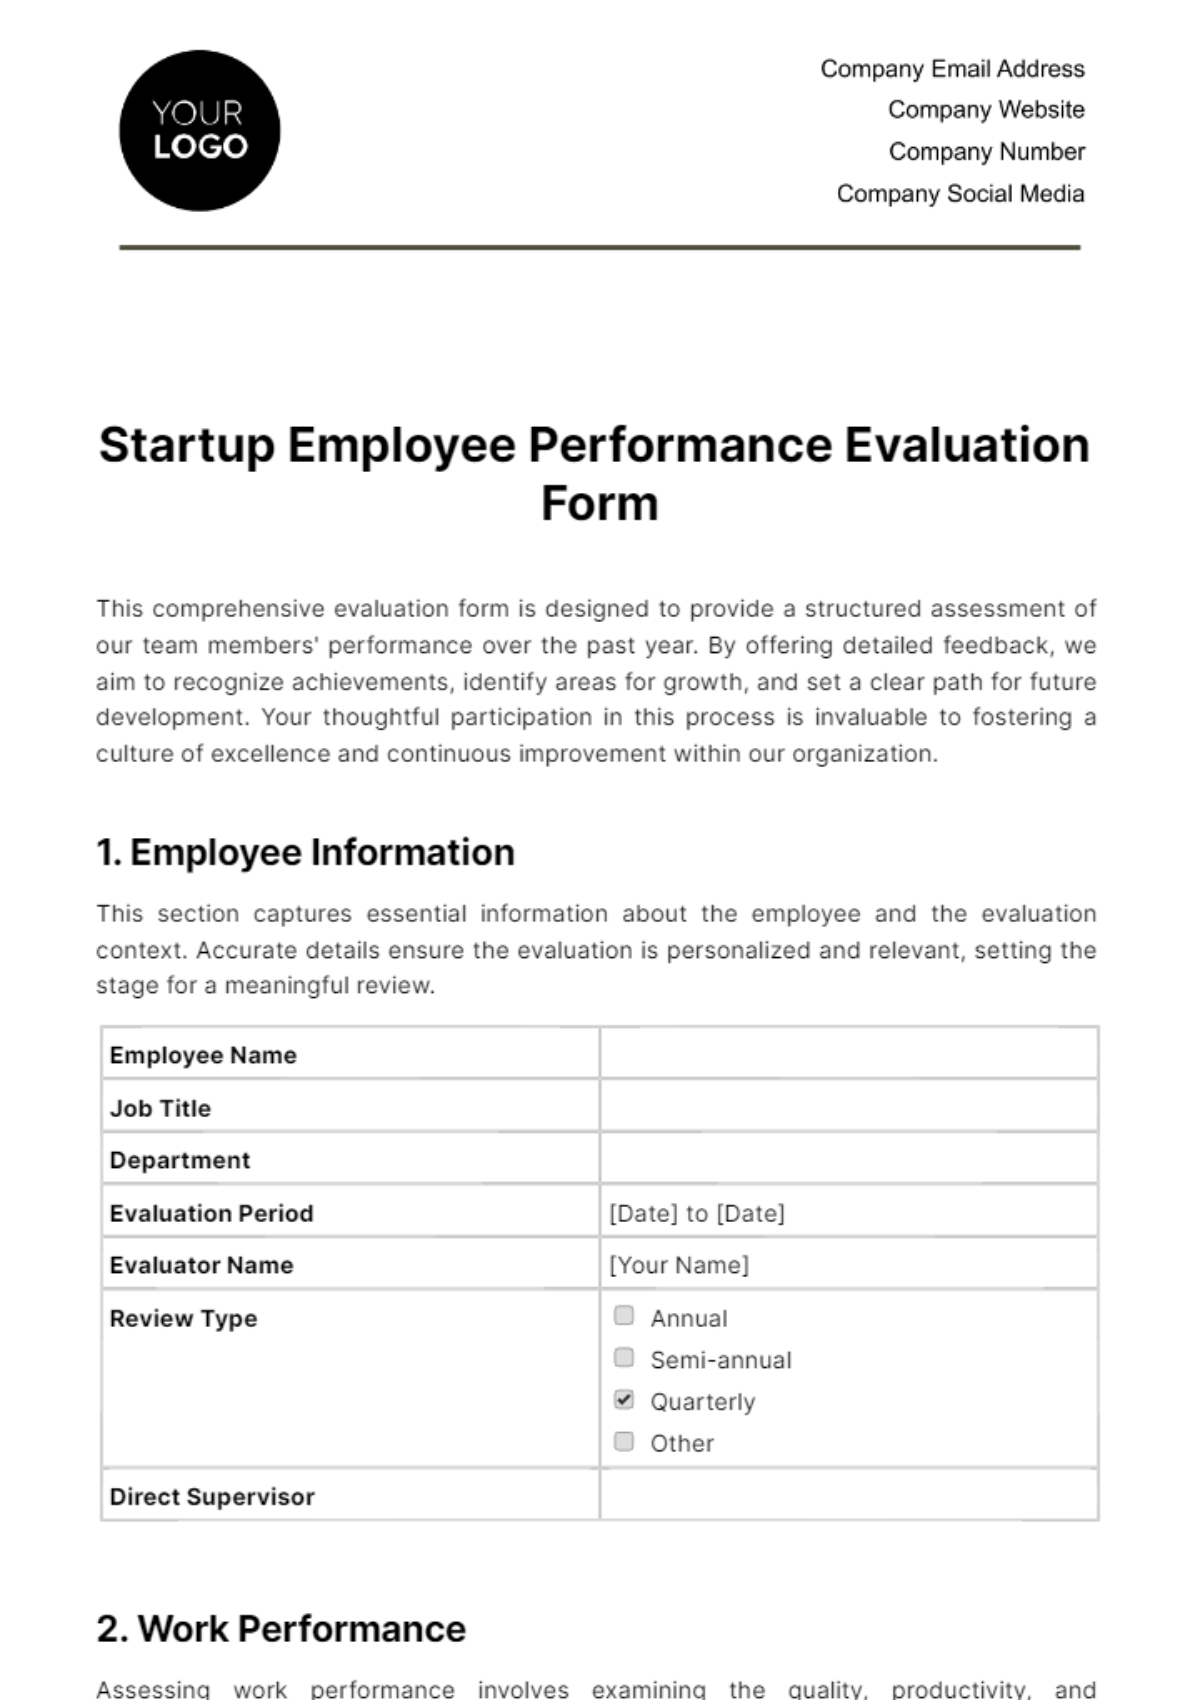 Startup Employee Performance Evaluation Form Template